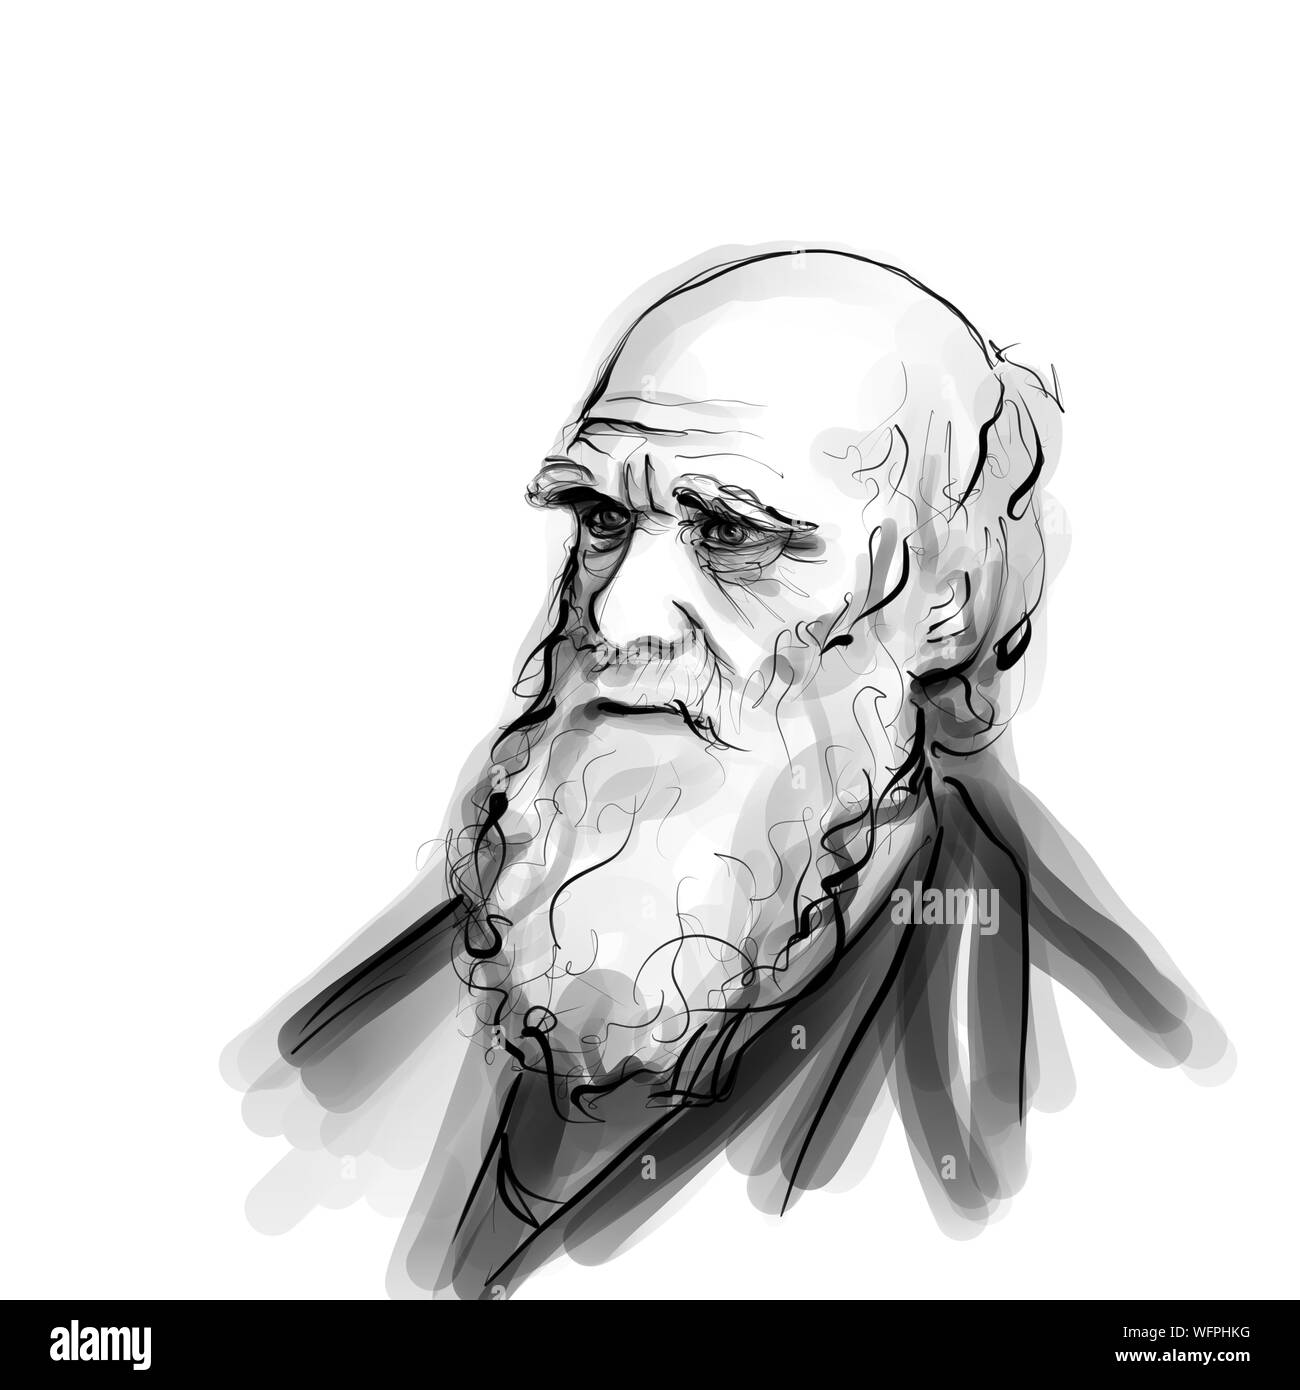 Caricature of Charles Darwin Evolution Theory Scientist Portrait Drawing  Illustration Stock Photo - Alamy